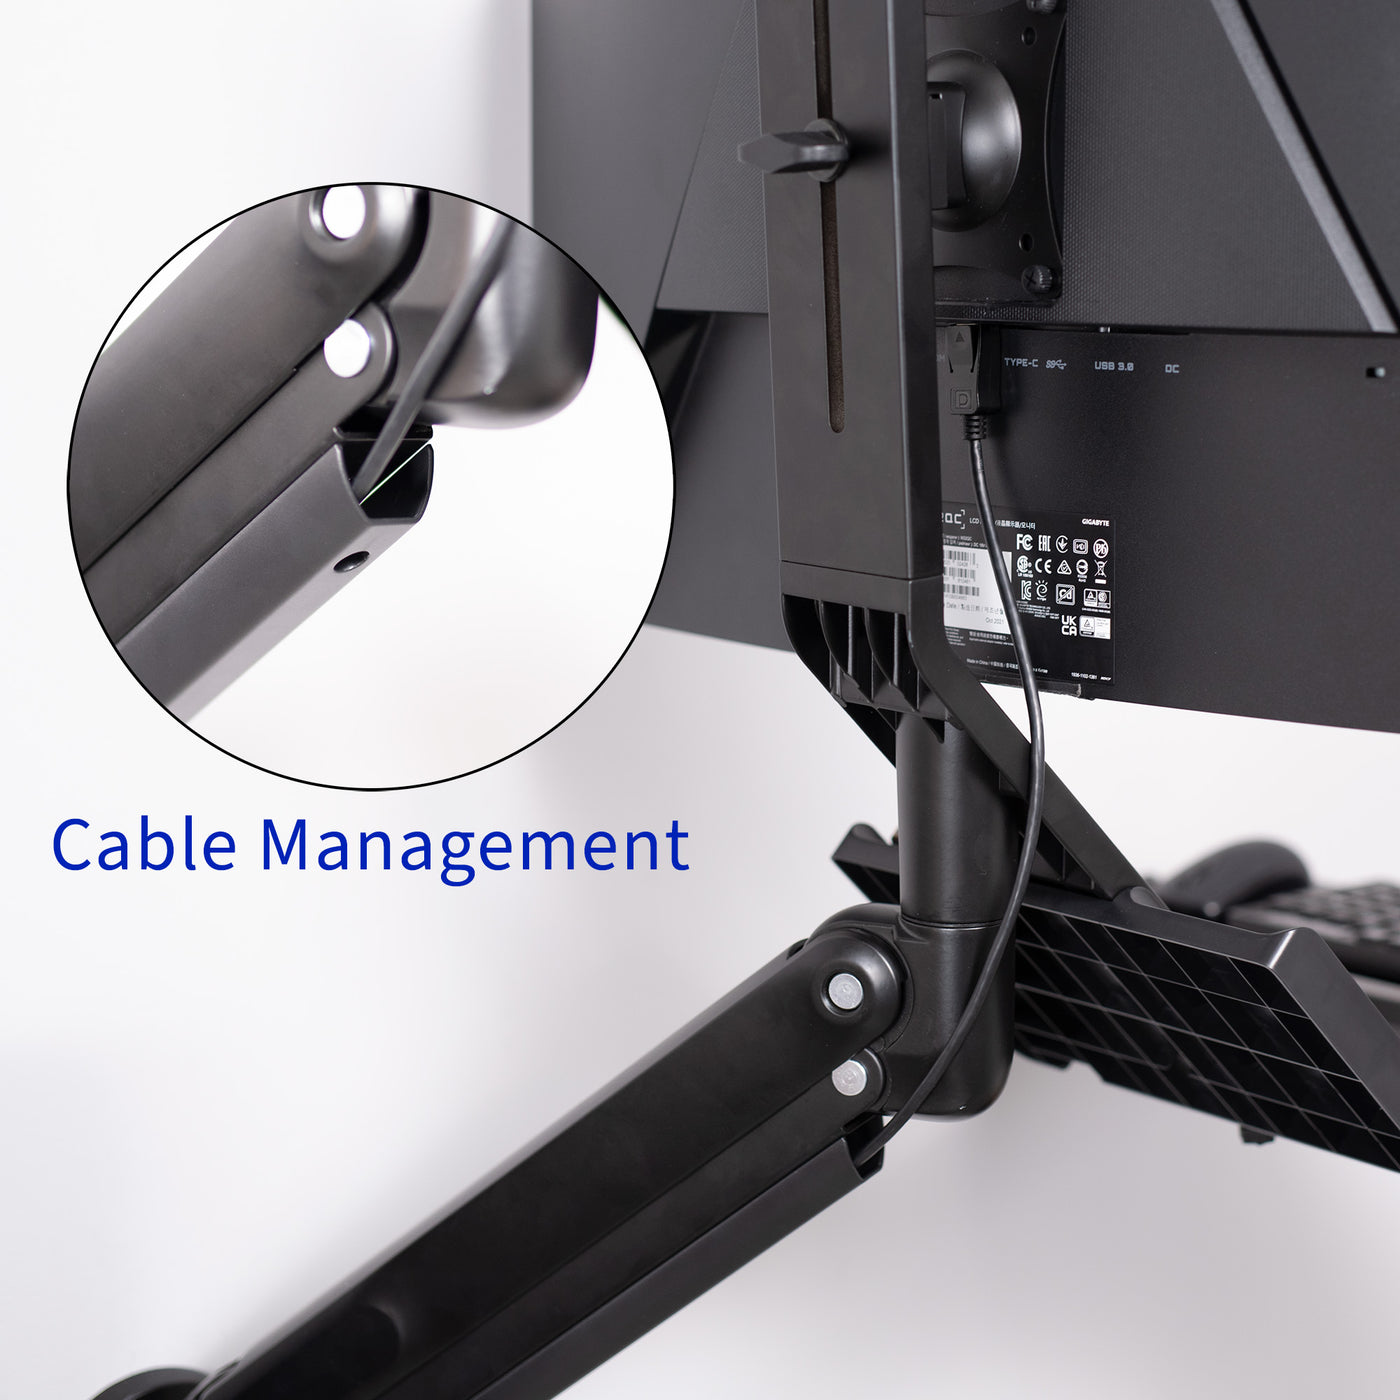 Sturdy ergonomic single monitor sit to stand wall mount workstation with integrated cable management.